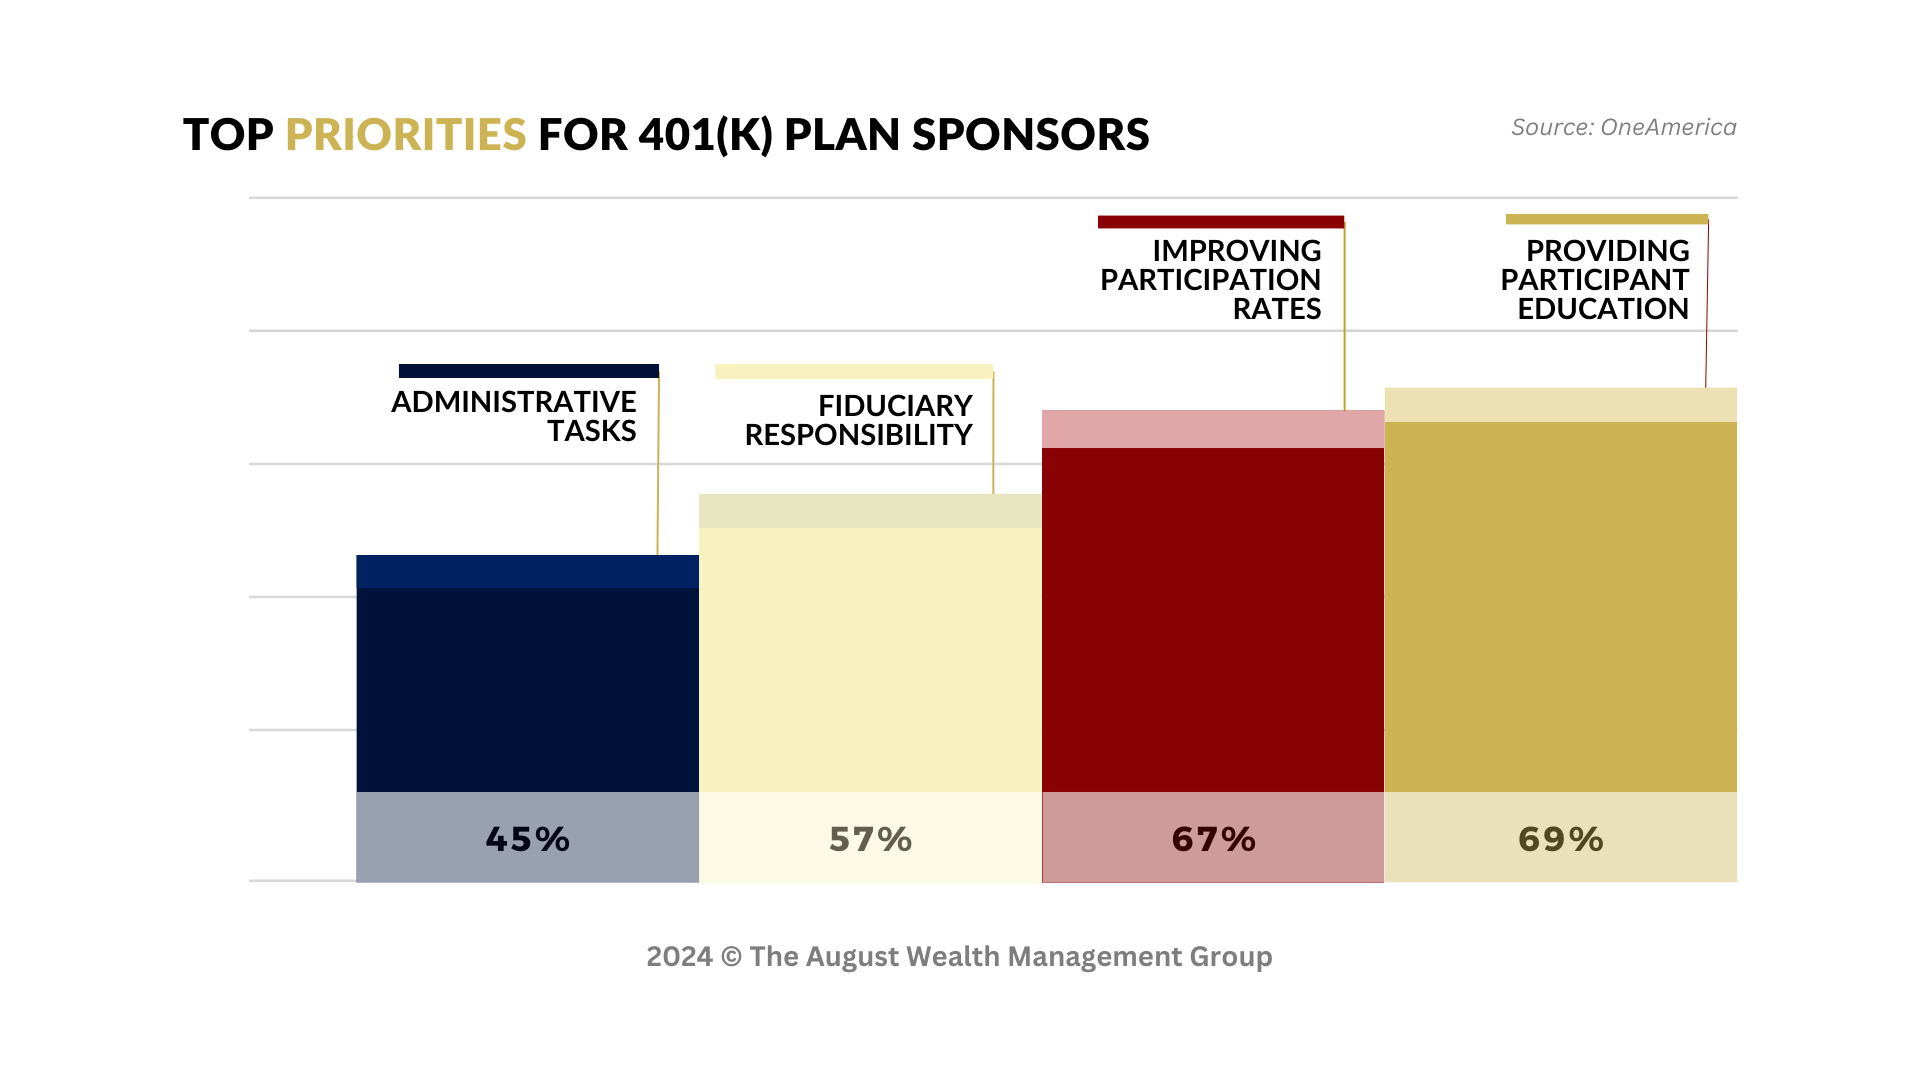 Graph depicting survey results highlighting key concerns for 401(k) sponsors: Participant Education Essential (69%), Boosting Participation Rates (67%), Fiduciary Responsibility Paramount (57%), Navigating Administrative Tasks (45%). Source: One America, copyrighted by The August Wealth Management Group.